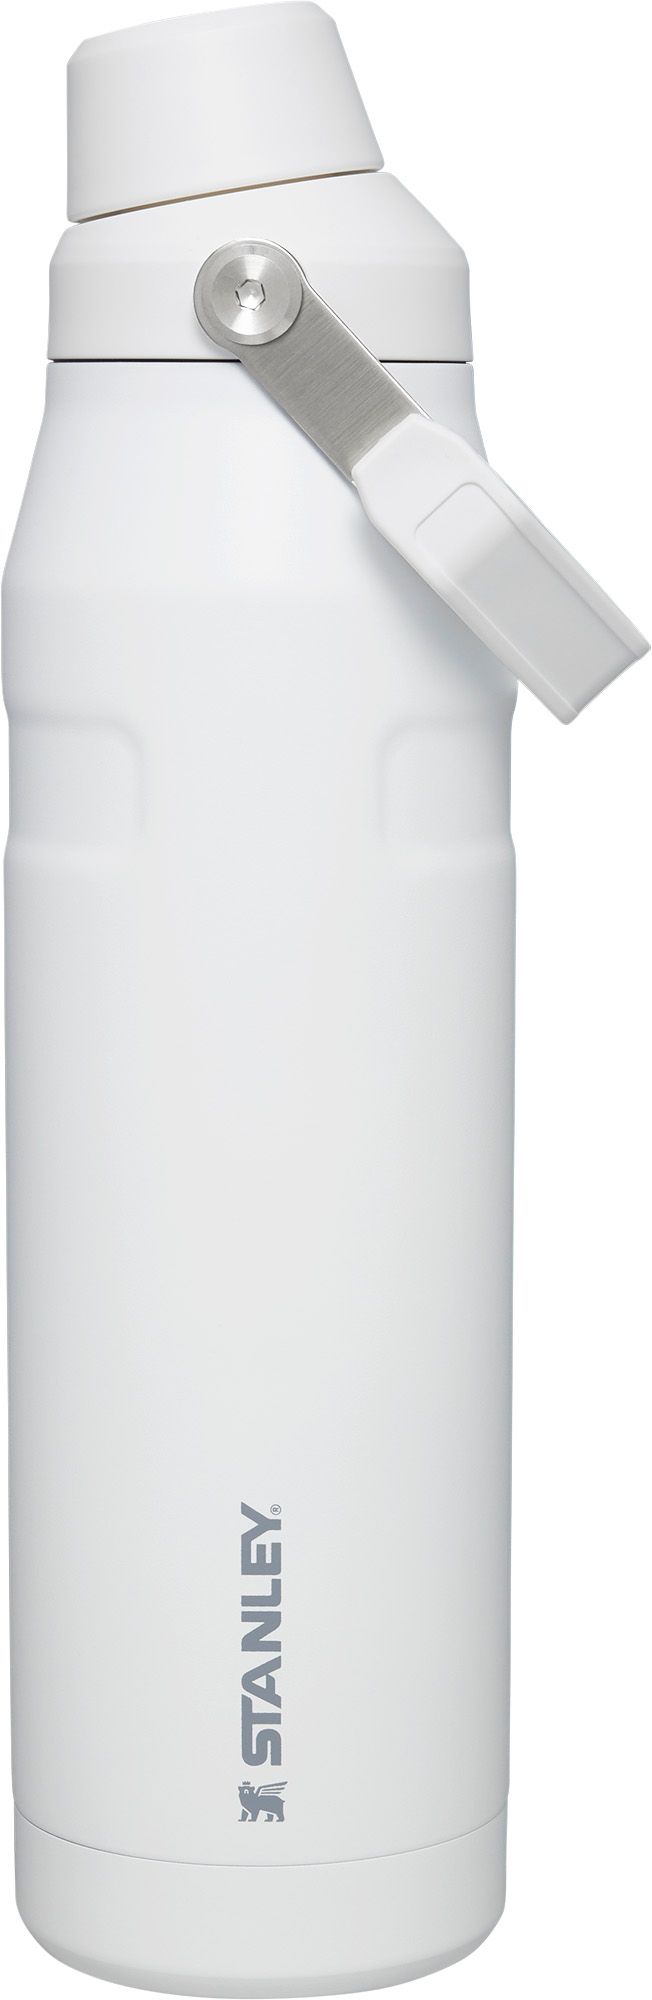 IceFlow Insulated Bottle with Fast Flow Lid | 36 oz Polar